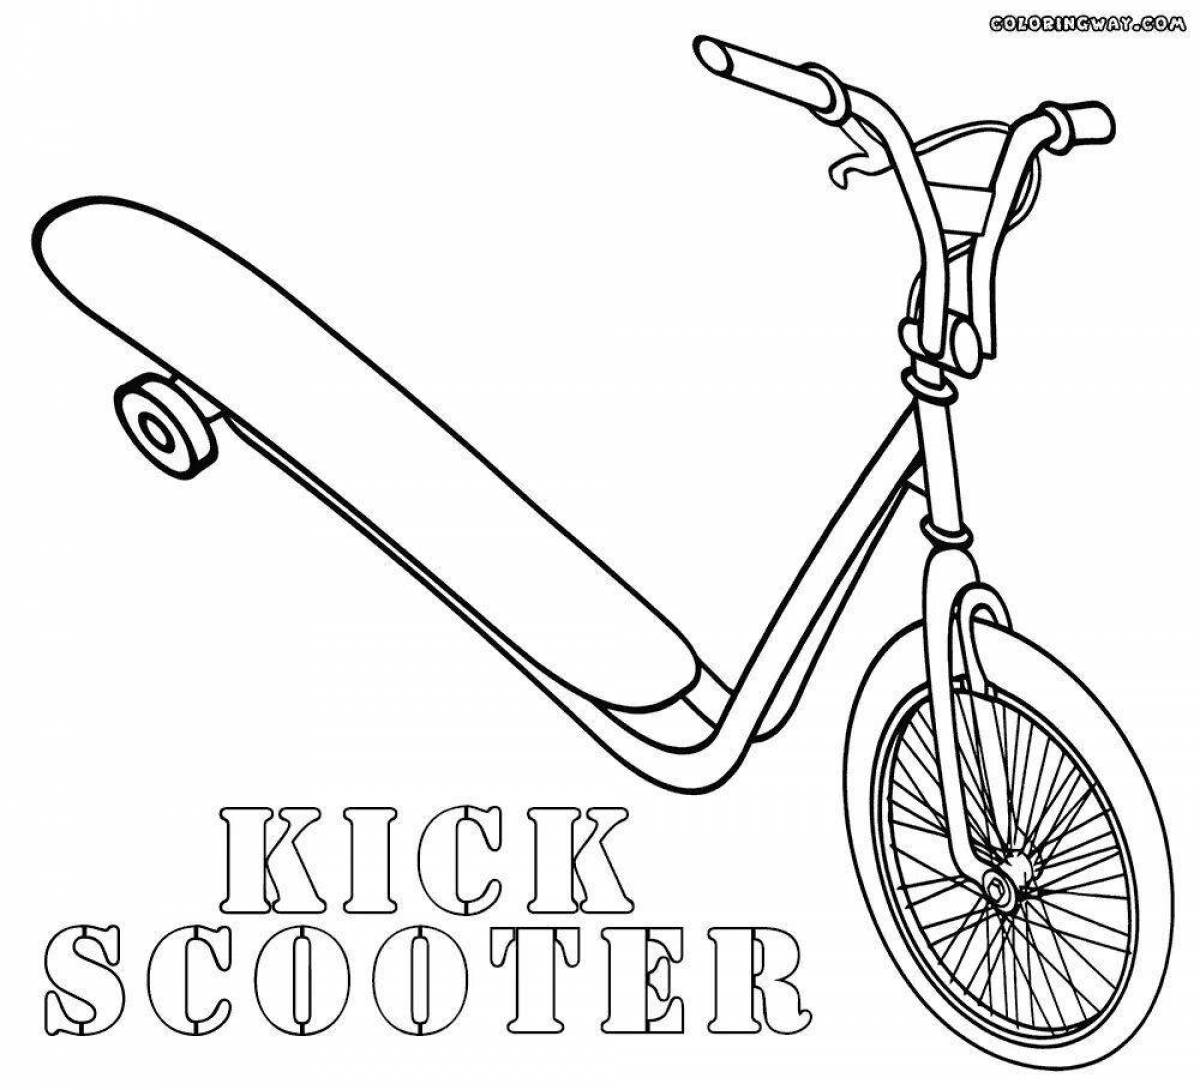 Coloring page colorful stunt scooter